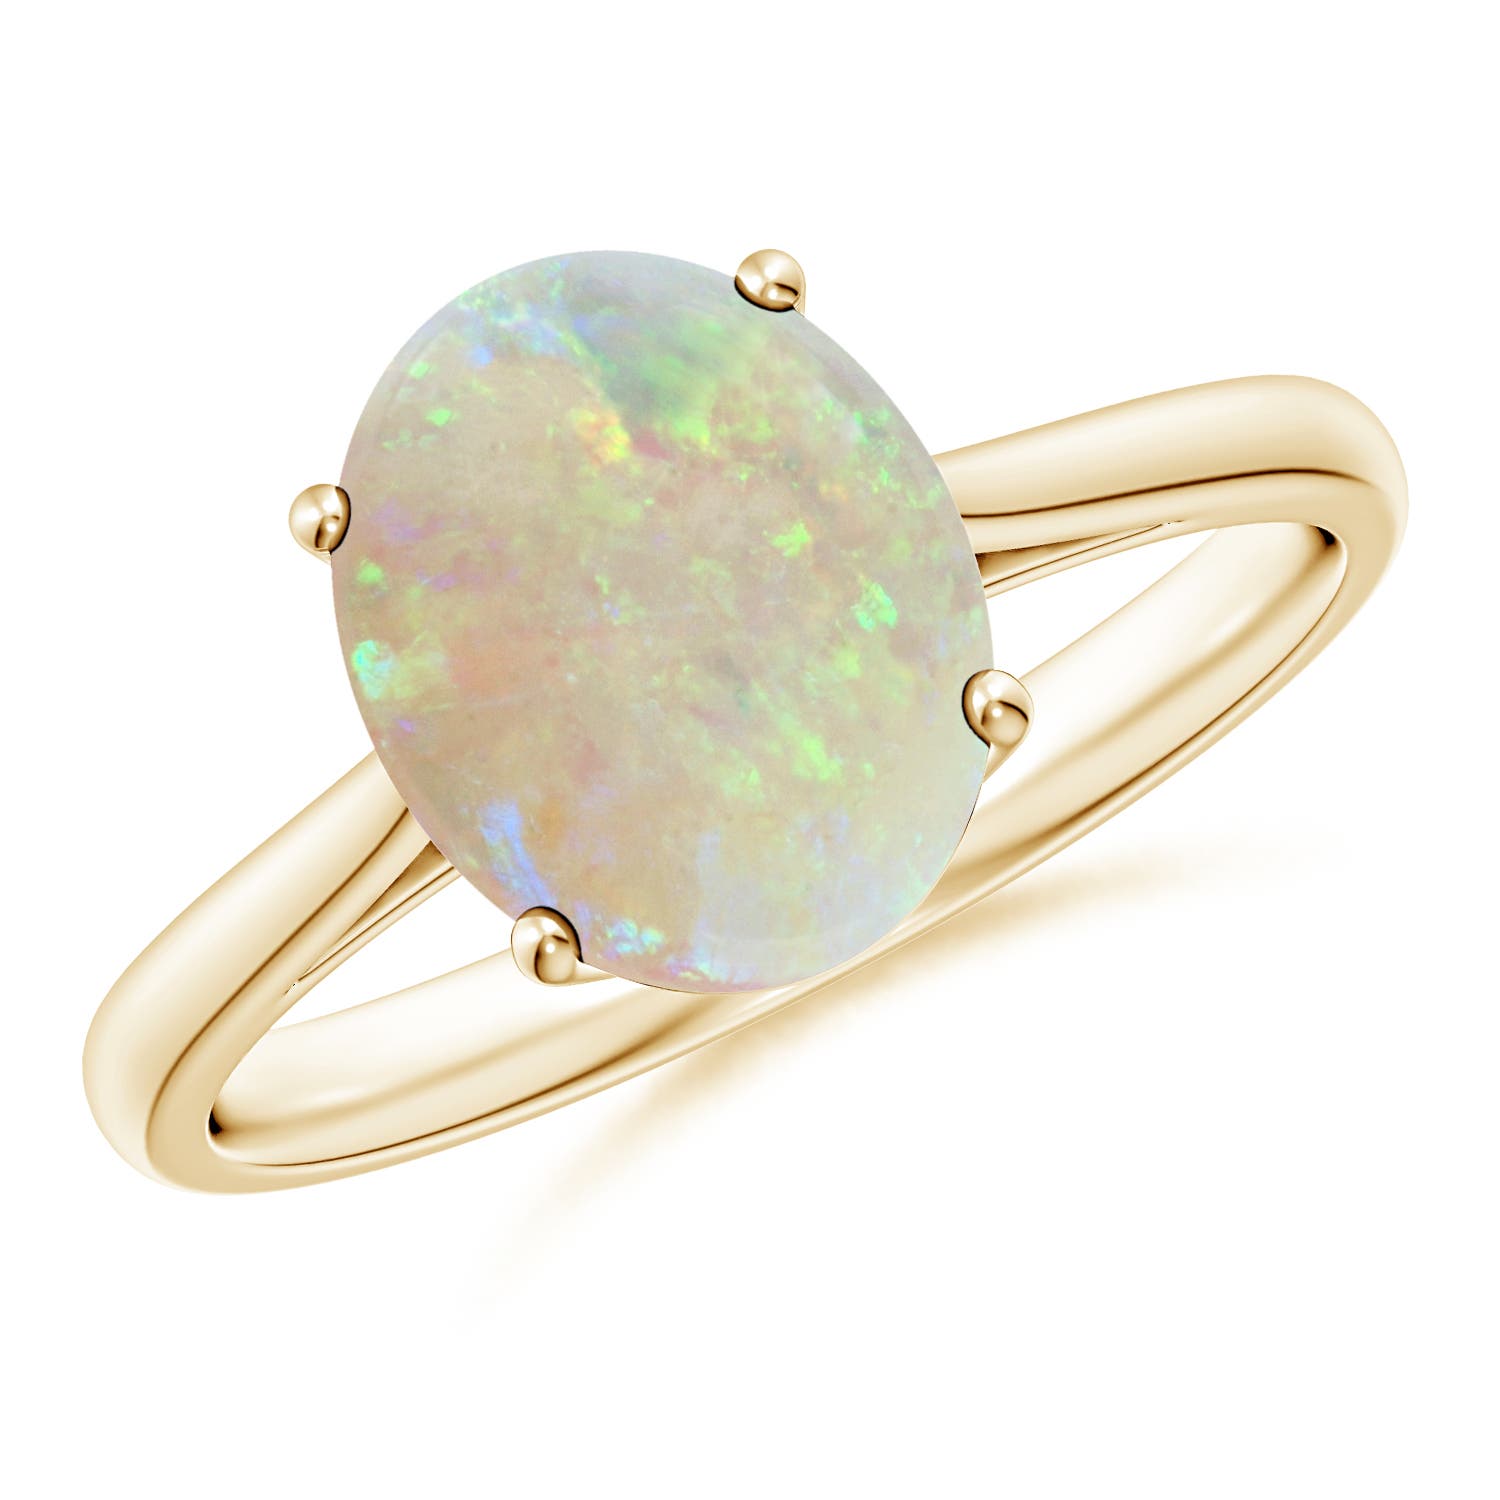 AAA - Opal / 1.45 CT / 14 KT Yellow Gold